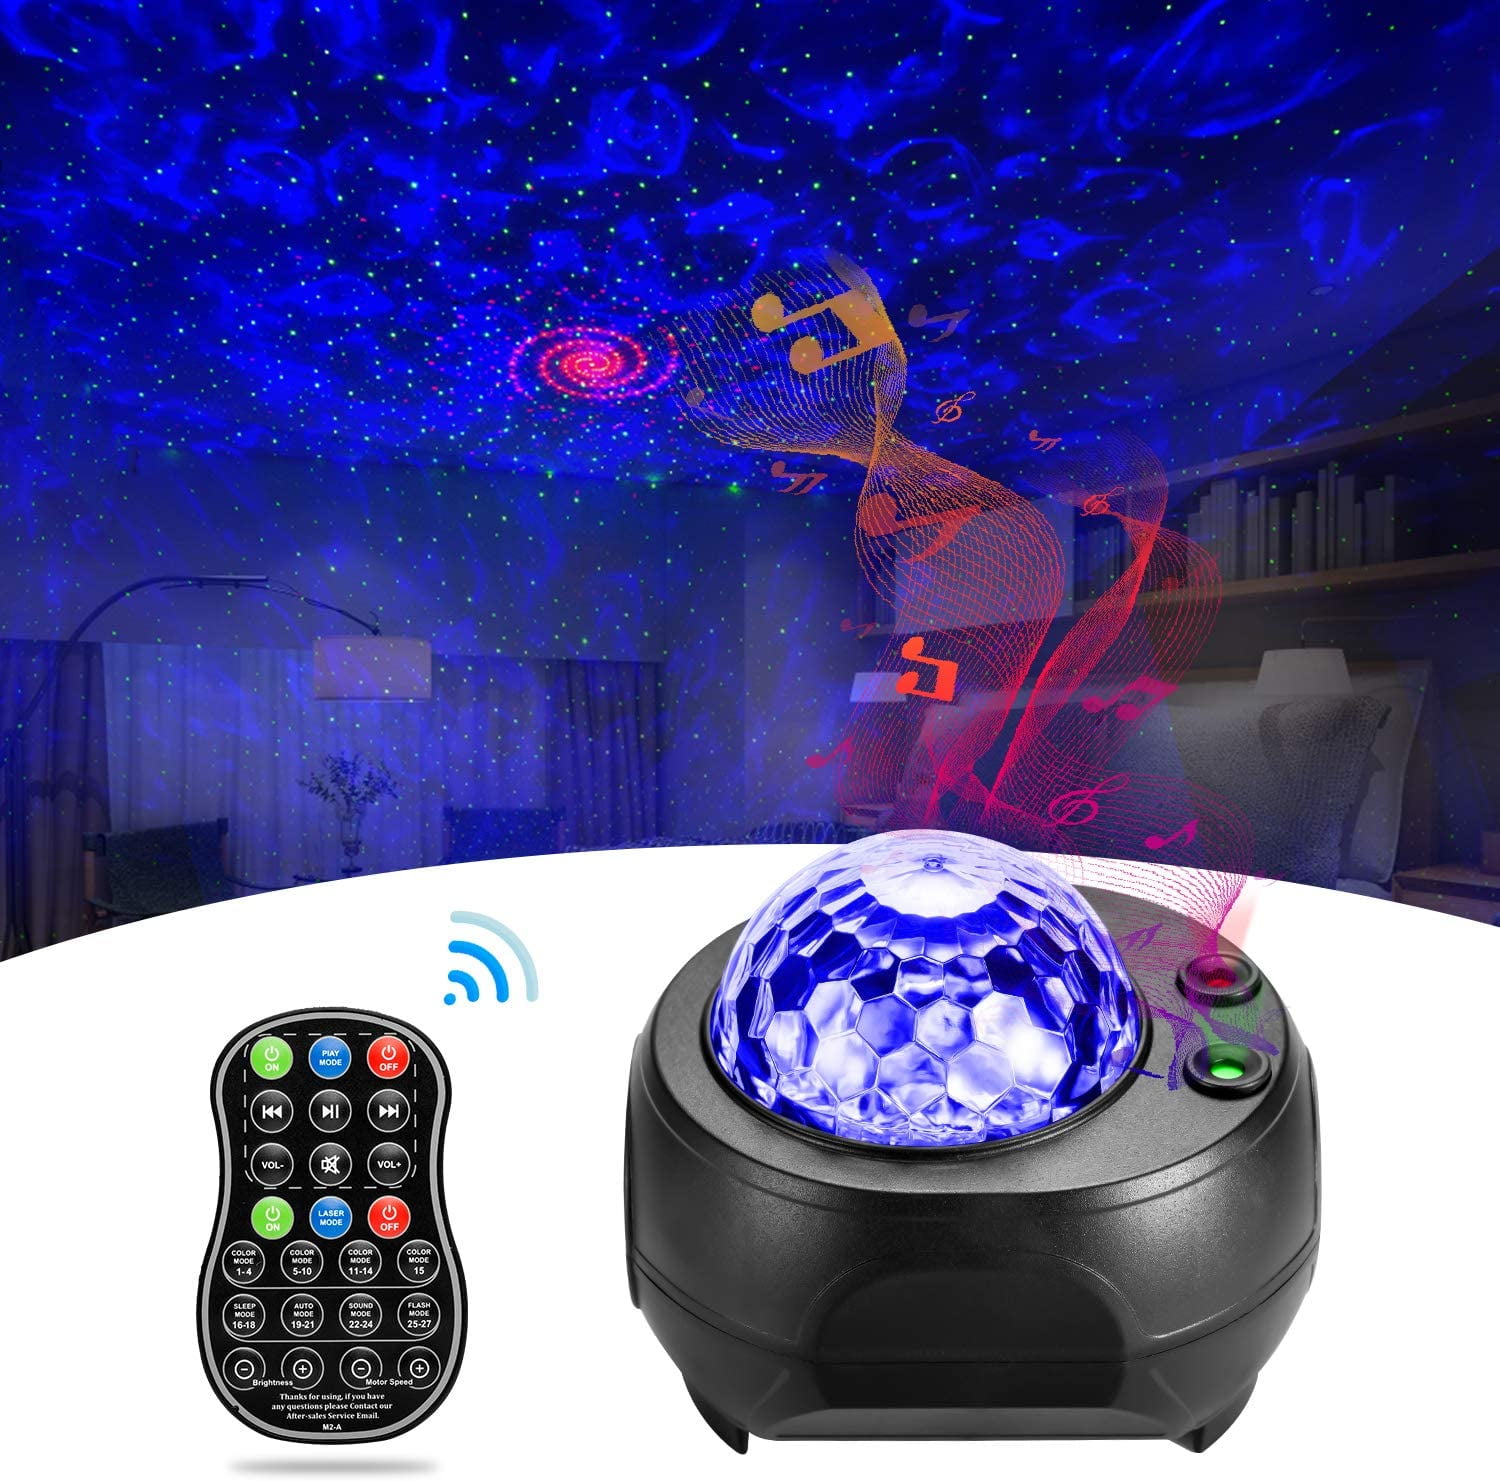 LBell LED Night Light Projector 3 in 1 Galaxy Projector for sale online 